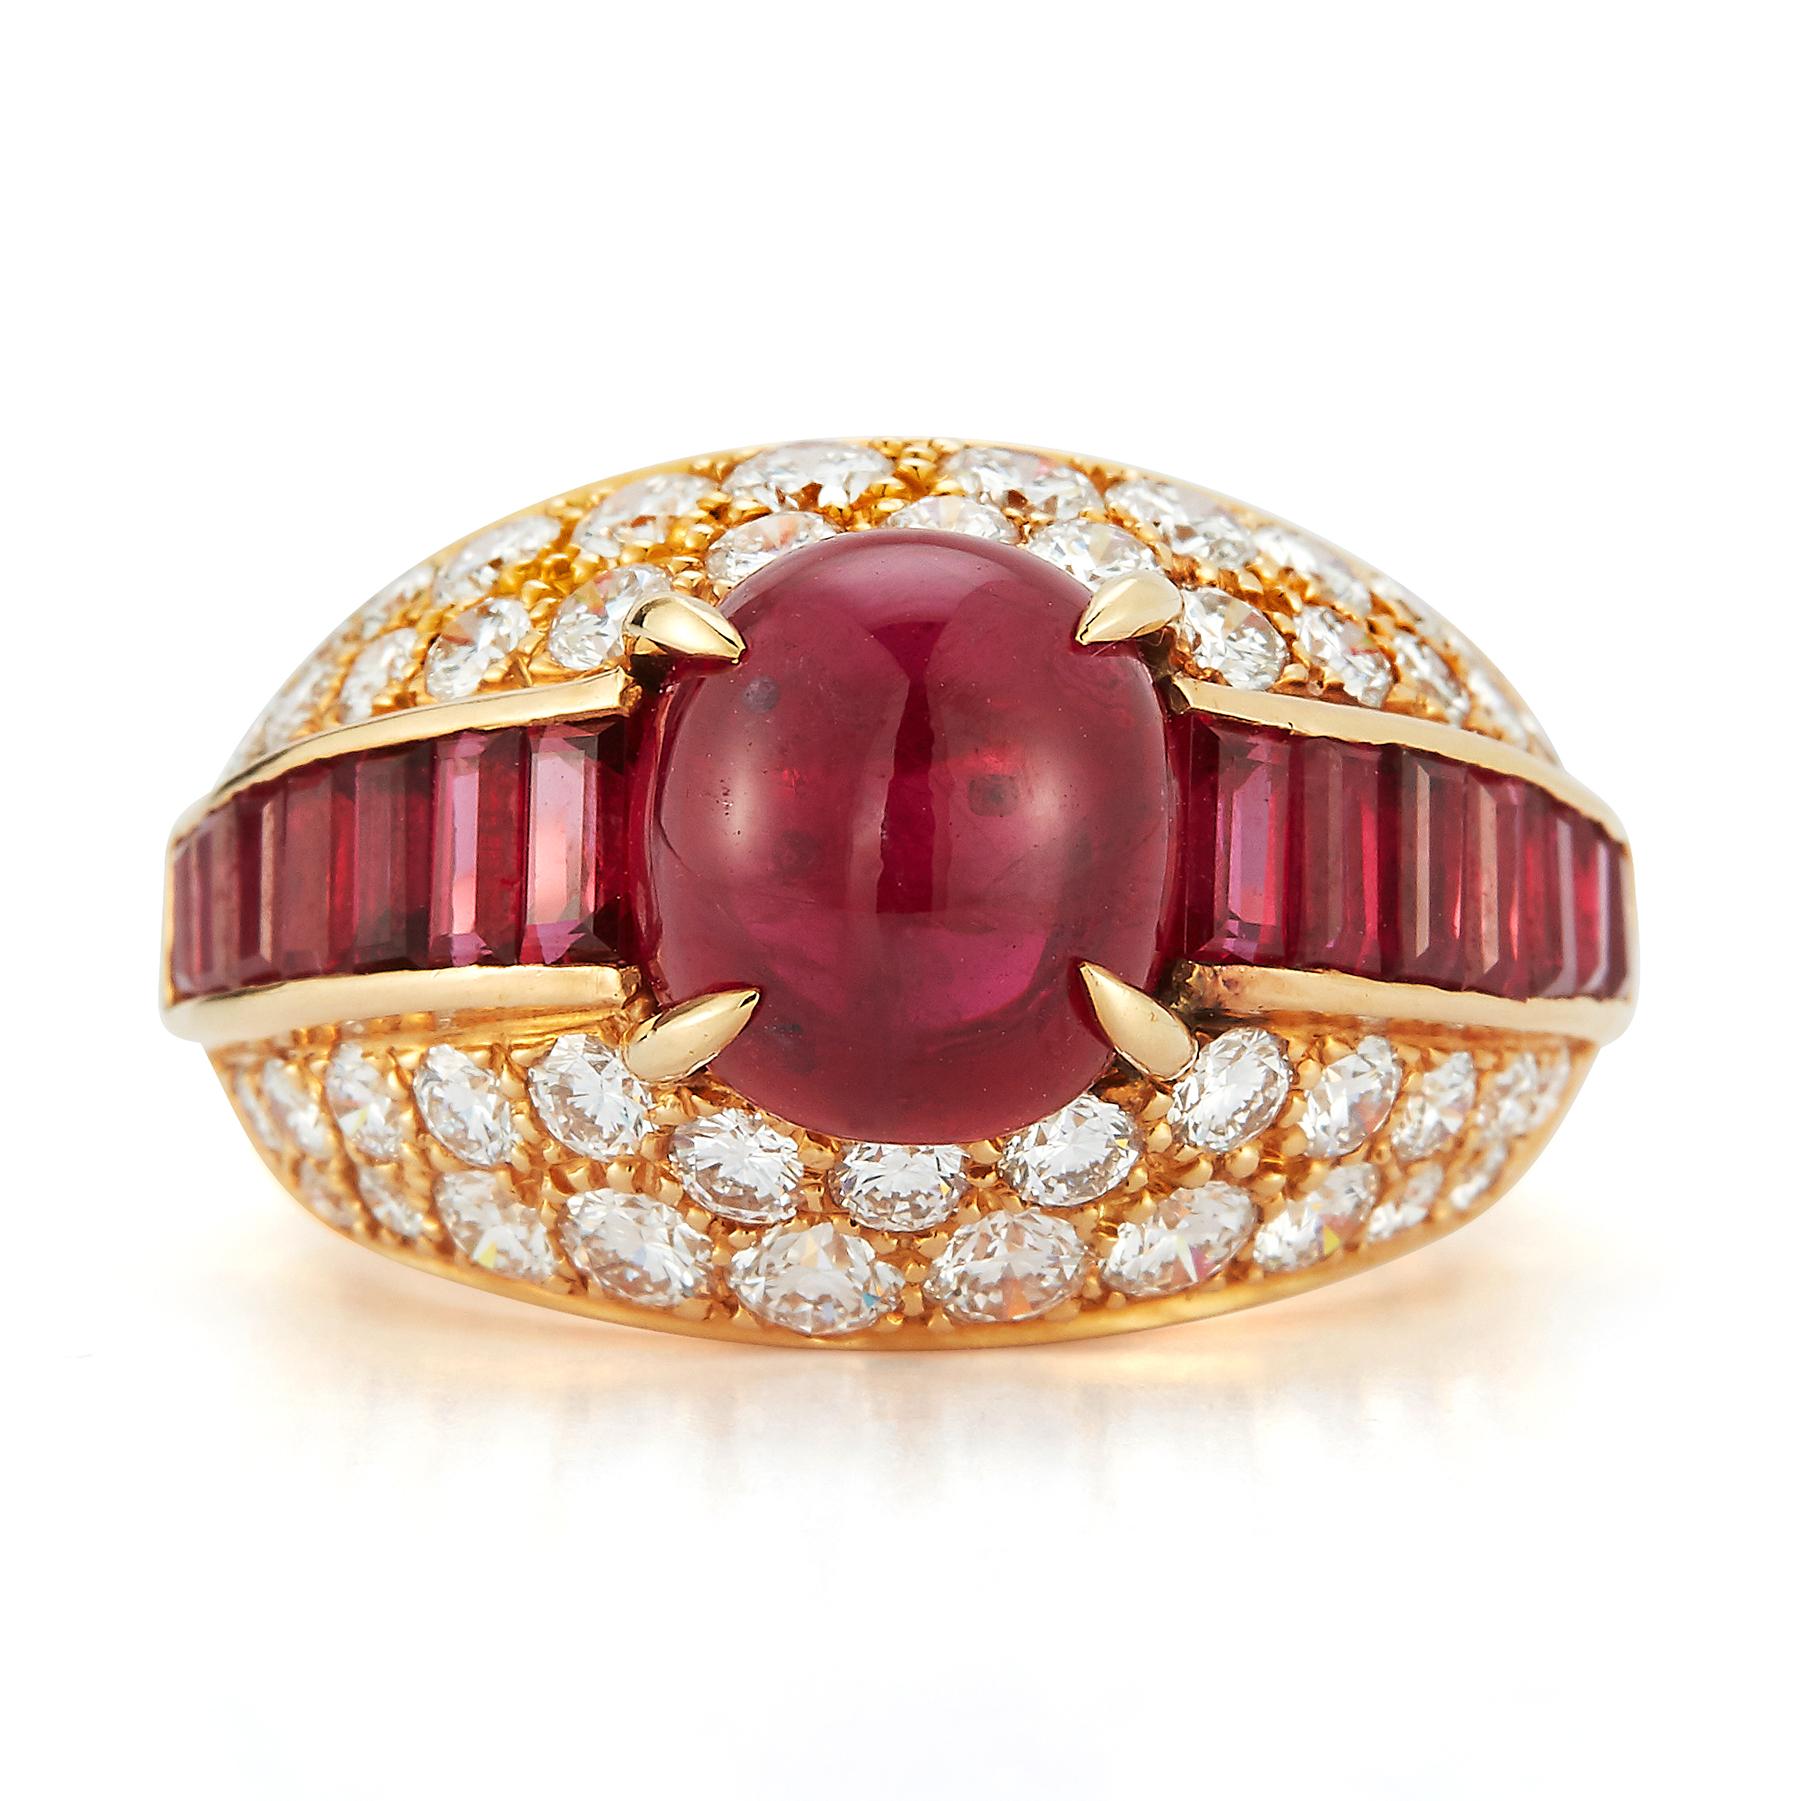 Van Cleef & Arpels Cabochon Ruby & Diamond Men's Ring 

1 cabochon ruby  set with emerald cut rubies & round cut diamonds in 18k yellow gold 

Cabochon Ruby Weight: approx 4.00 cts 

Baguette Cut Ruby Weight: approx 2.00 cts

Round Cut Diamond